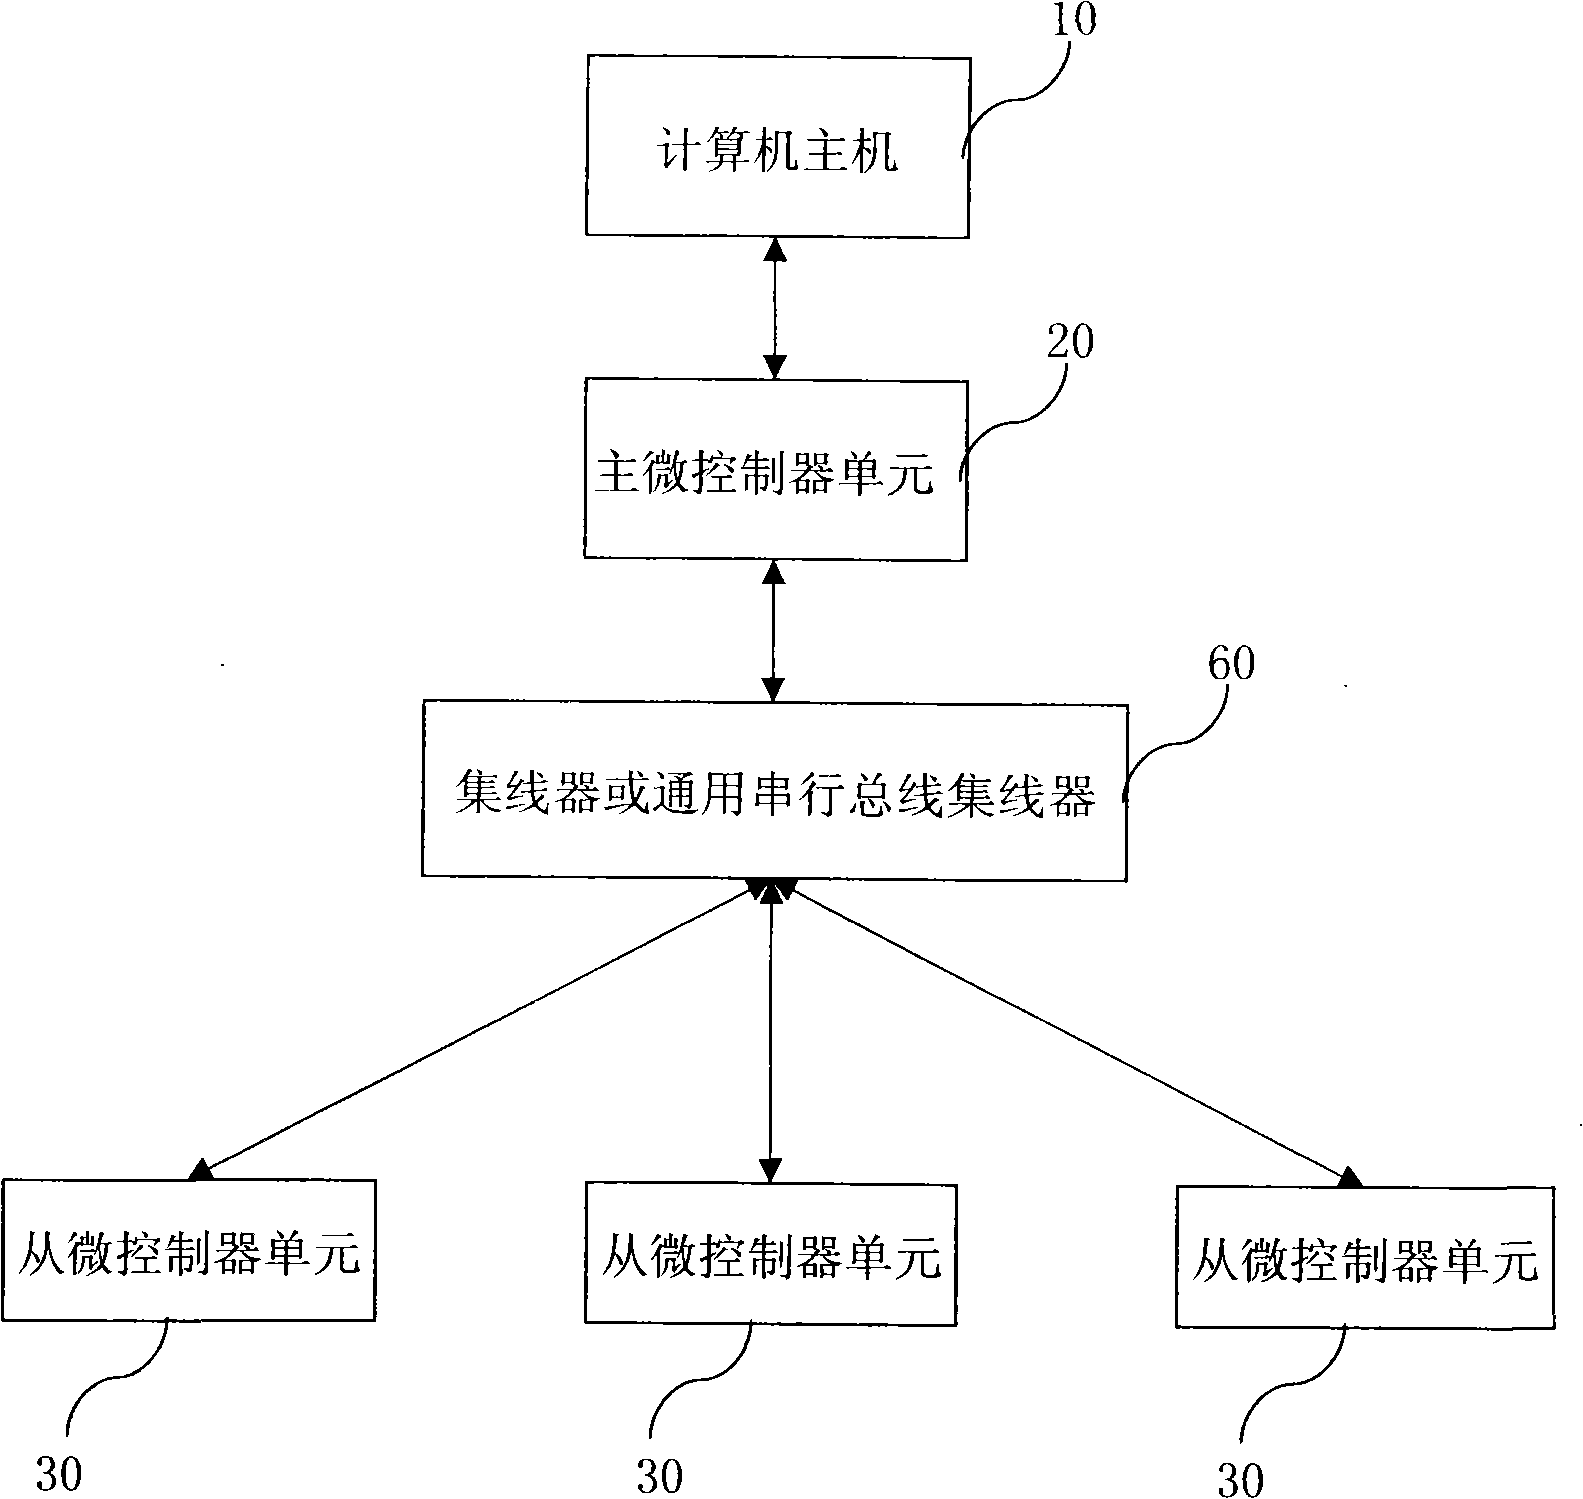 Parallel programming system and method